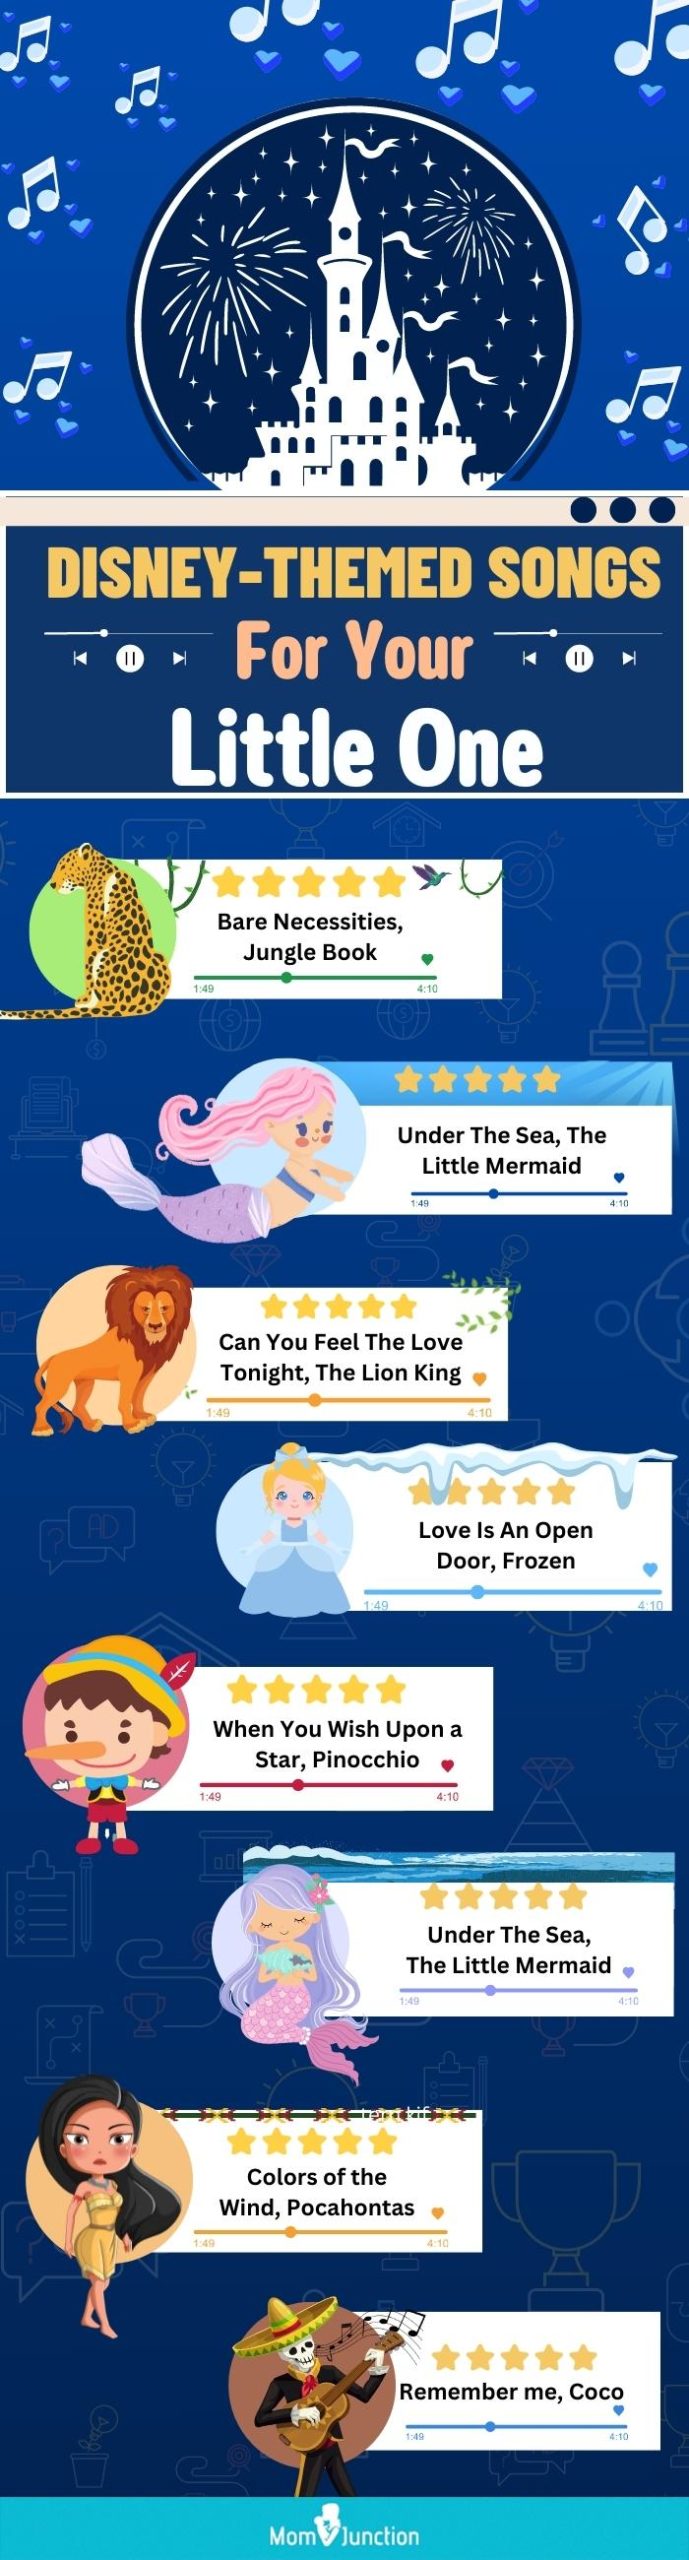 disney themed songs for babies (infographic)